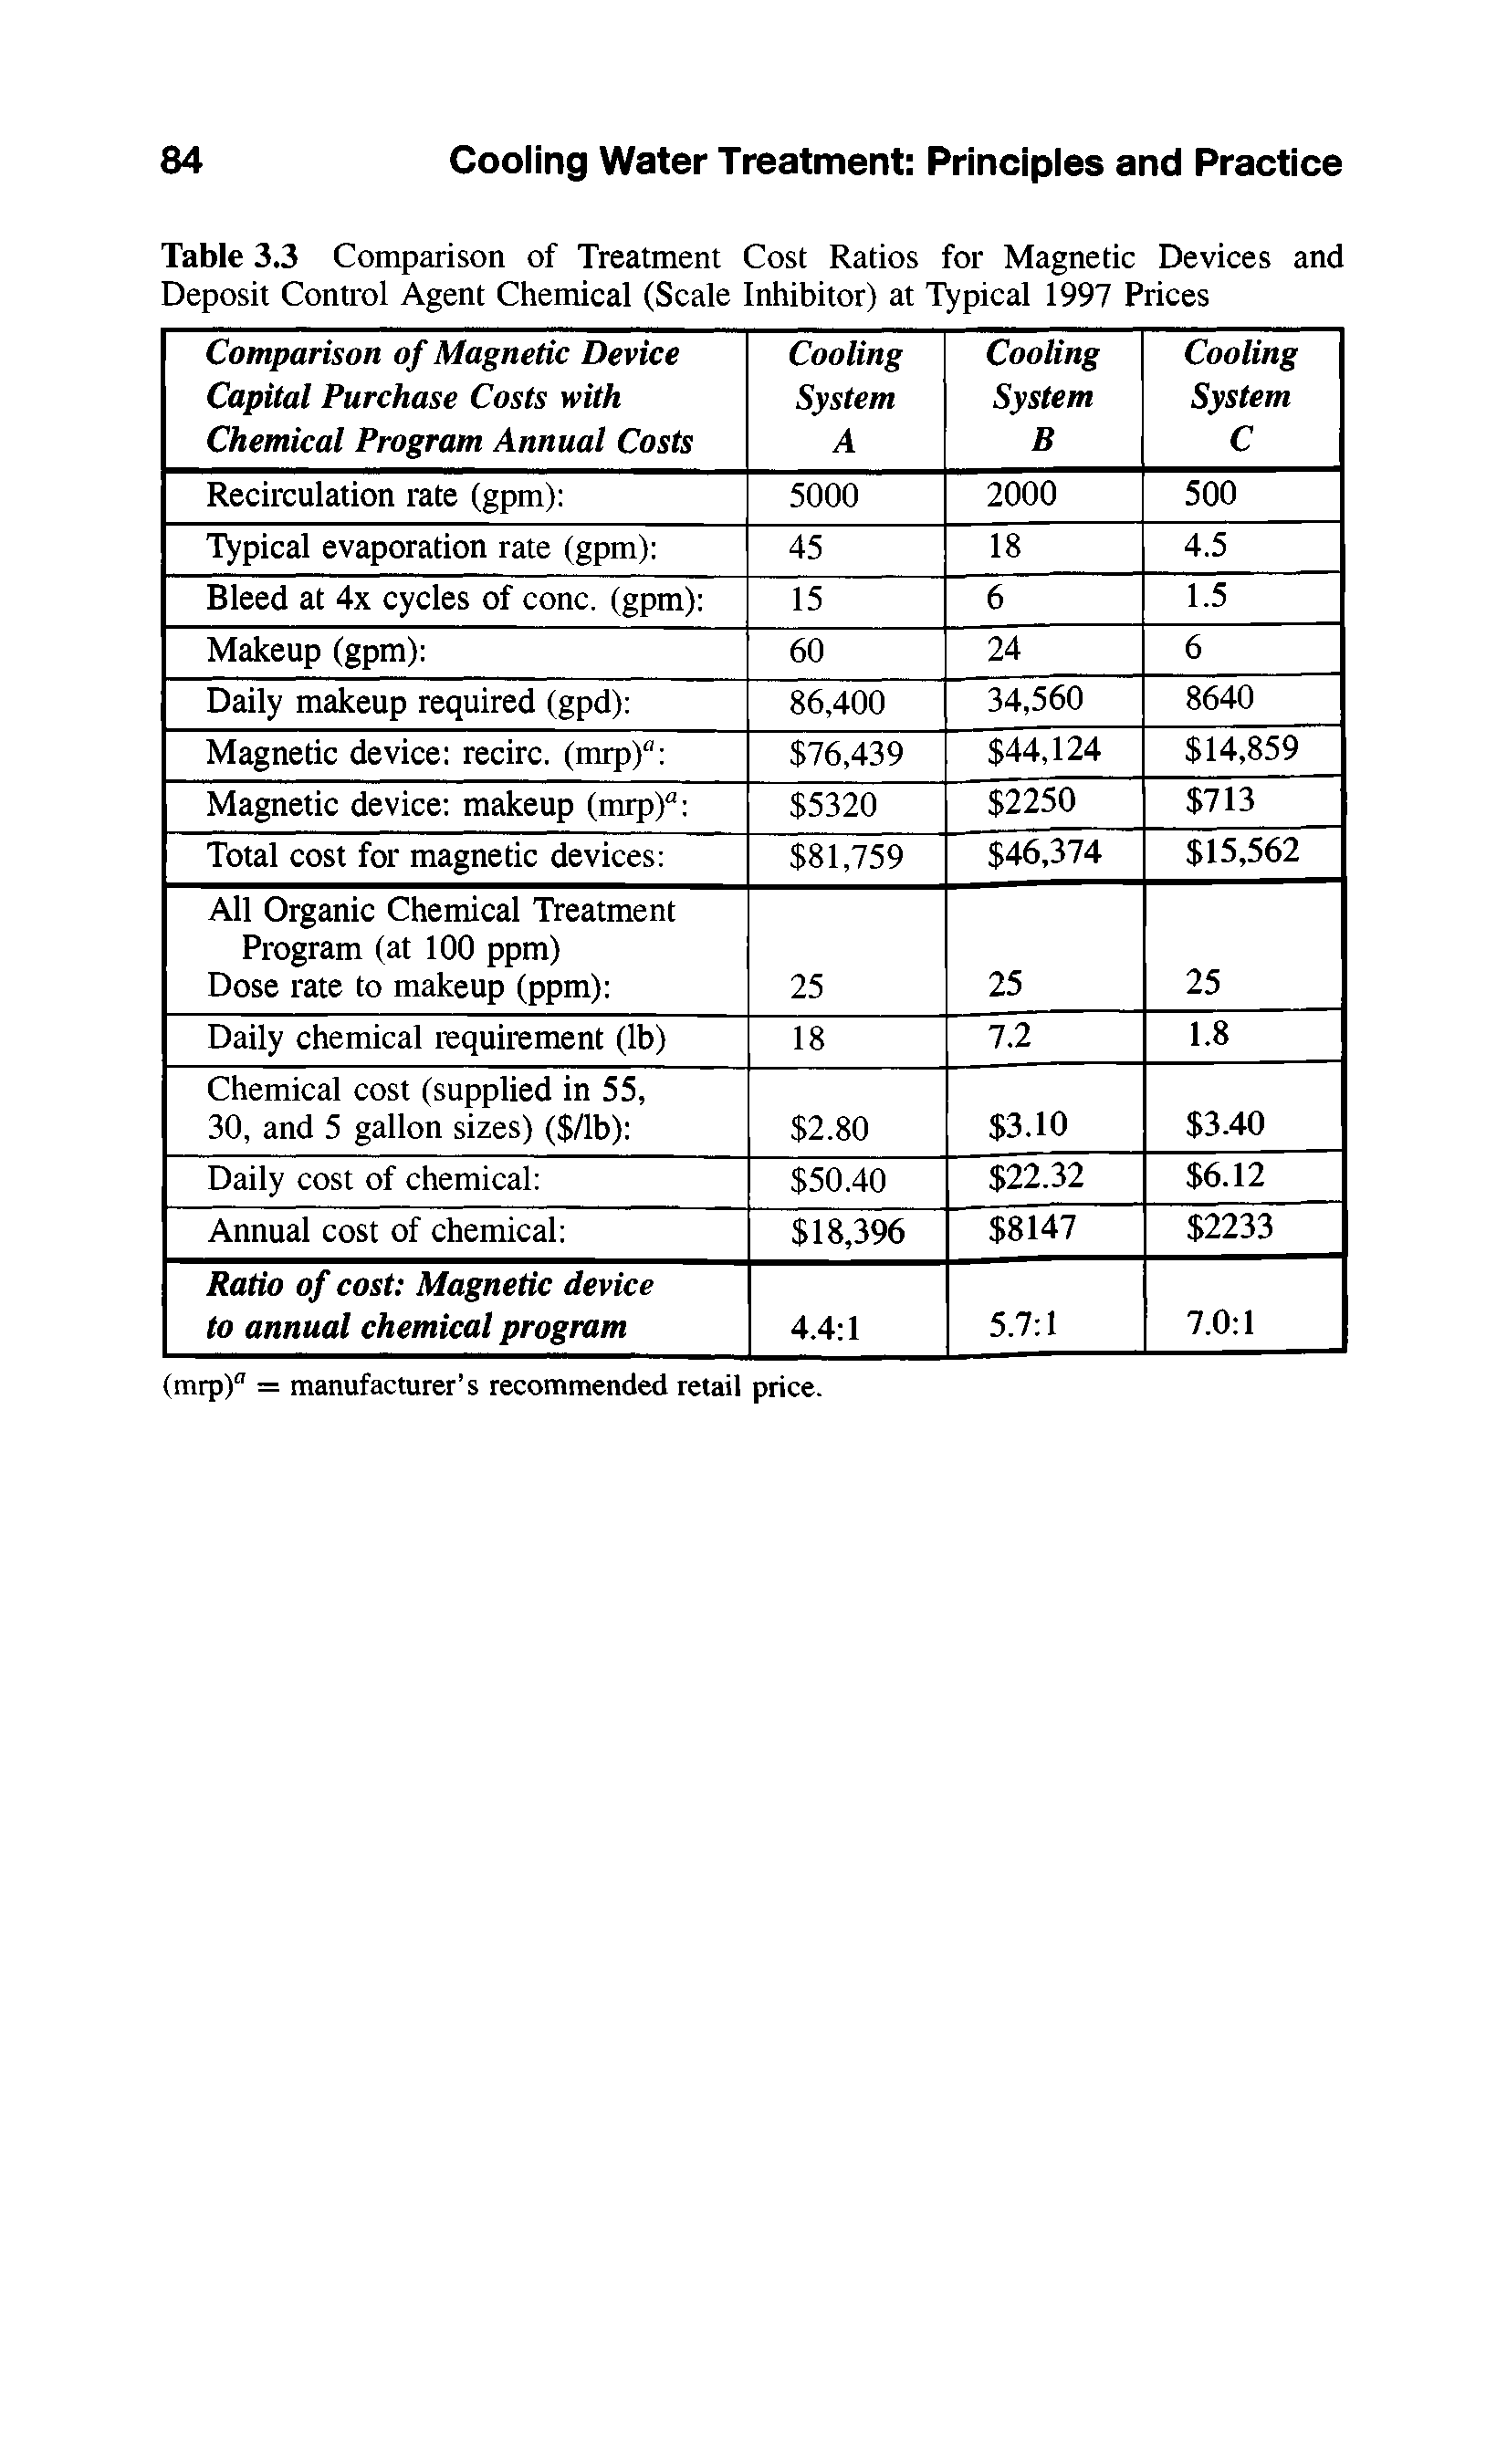 Table 3.3 Comparison of Treatment Cost Ratios for Magnetic Devices and Deposit Control Agent Chemical (Scale Inhibitor) at Typical 1997 Prices...